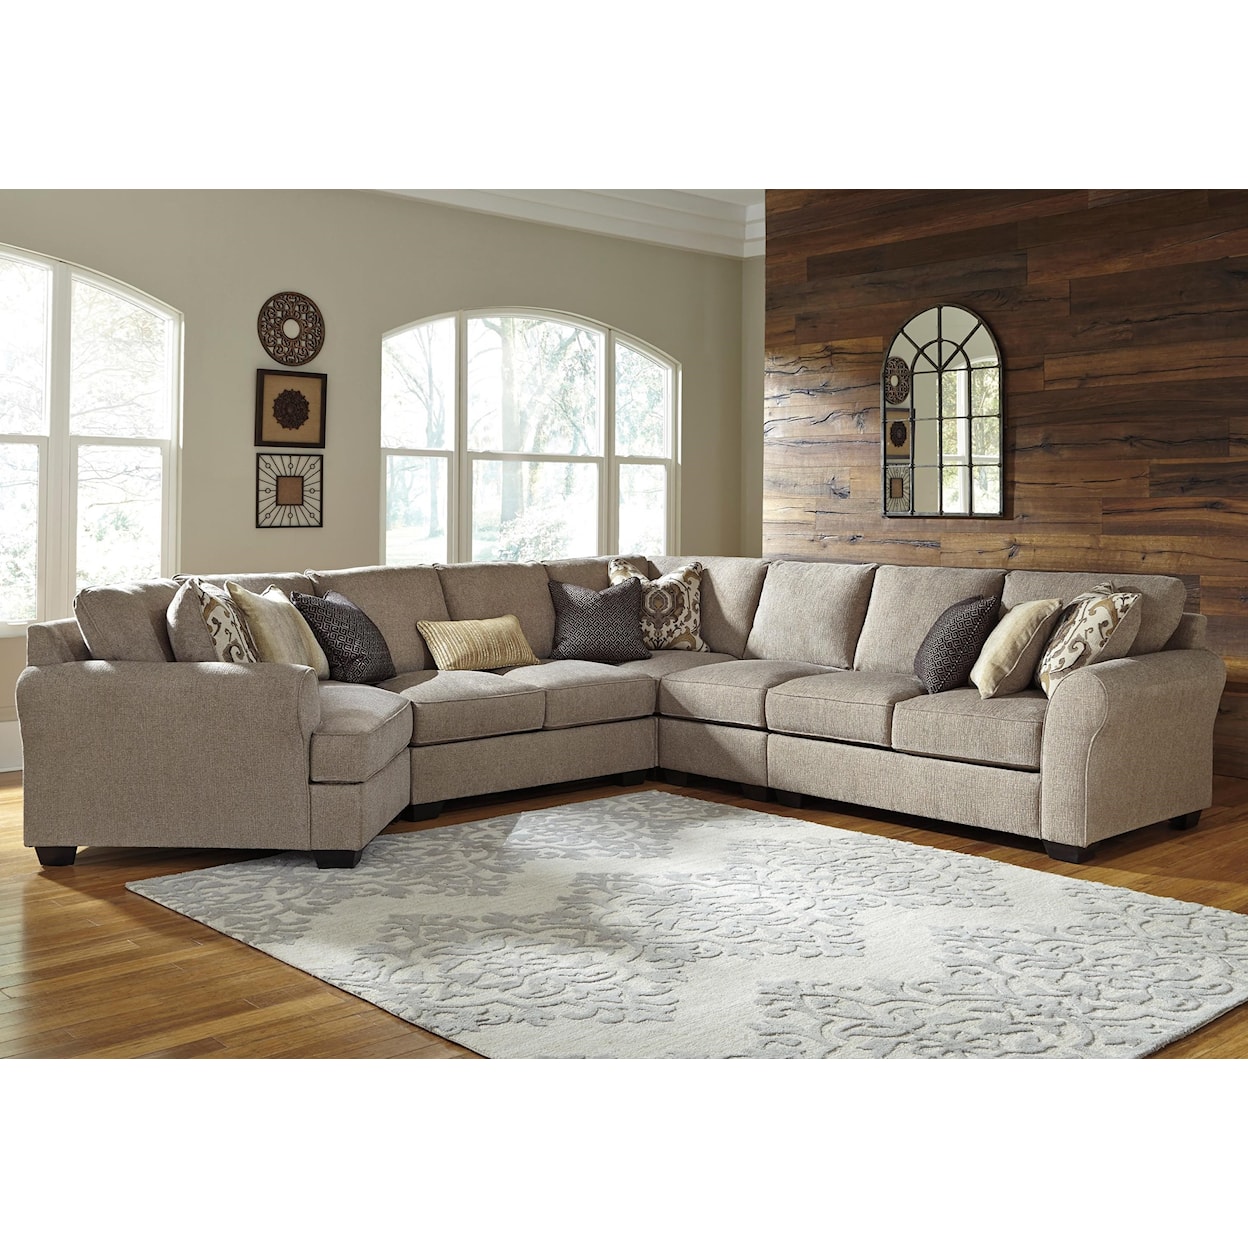 Benchcraft Pantomine 5-Piece Sectional with Cuddler